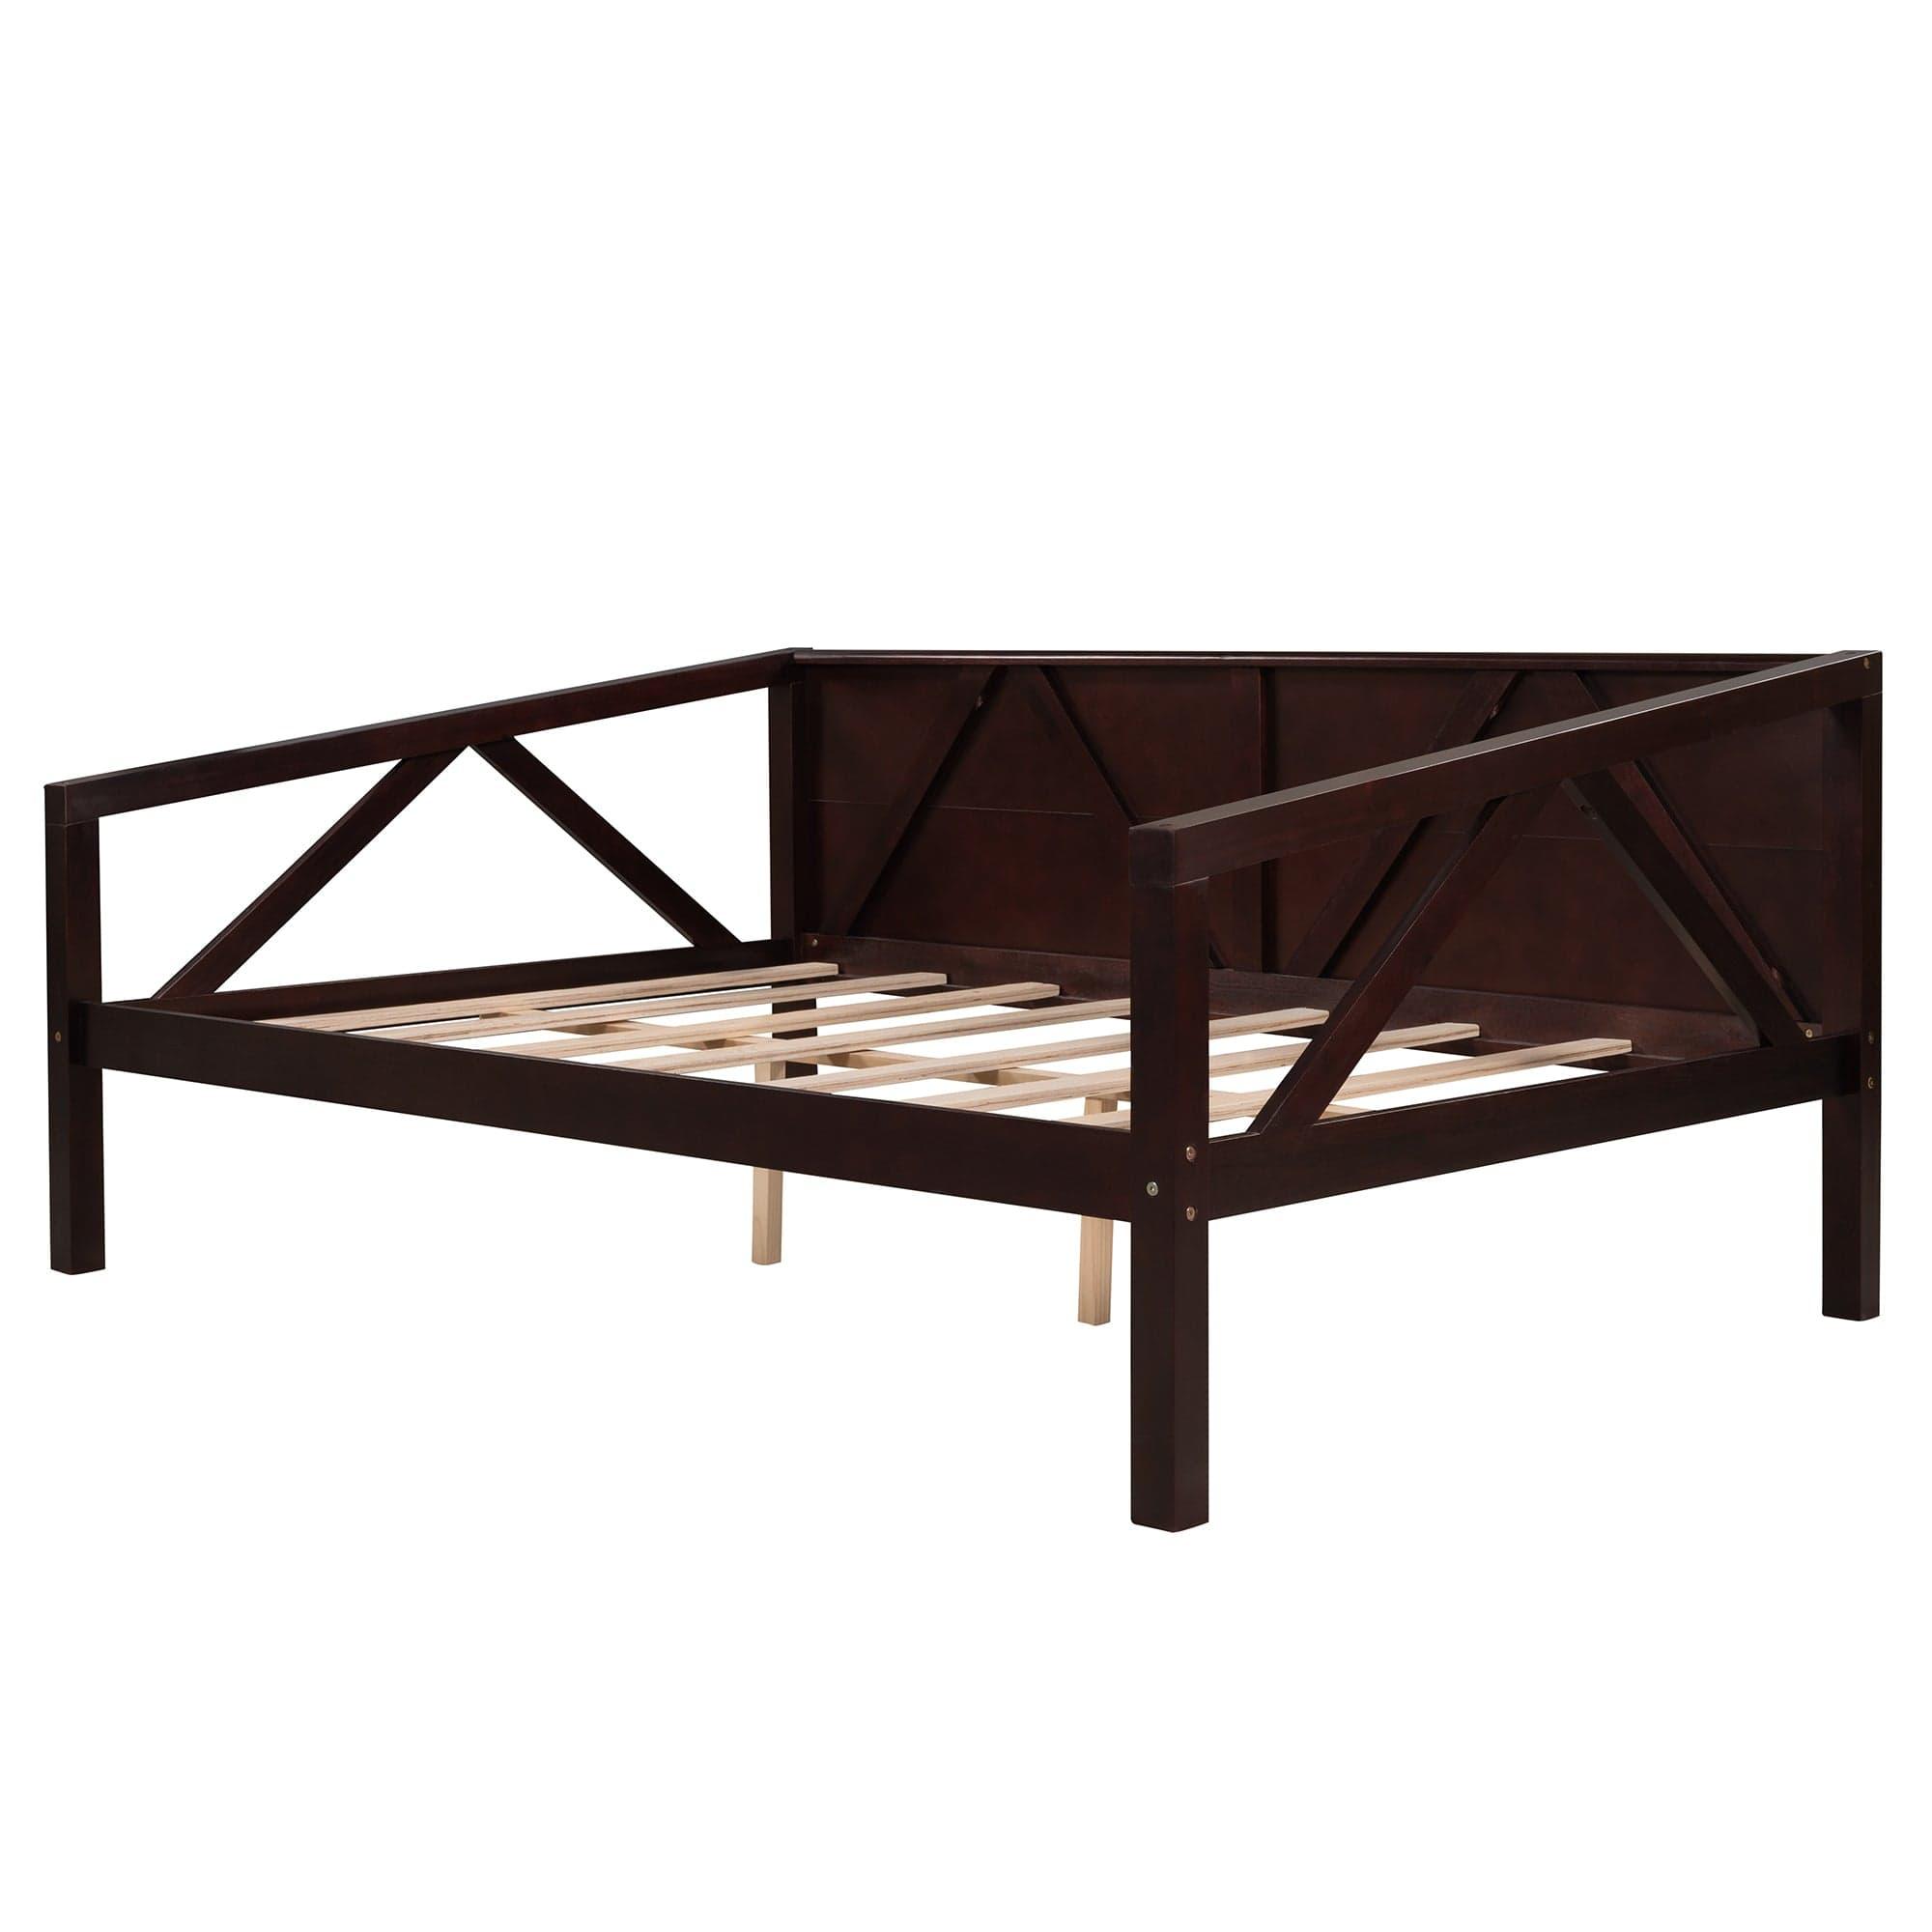 Shop Full size Daybed, Wood Slat Support, Espresso Mademoiselle Home Decor